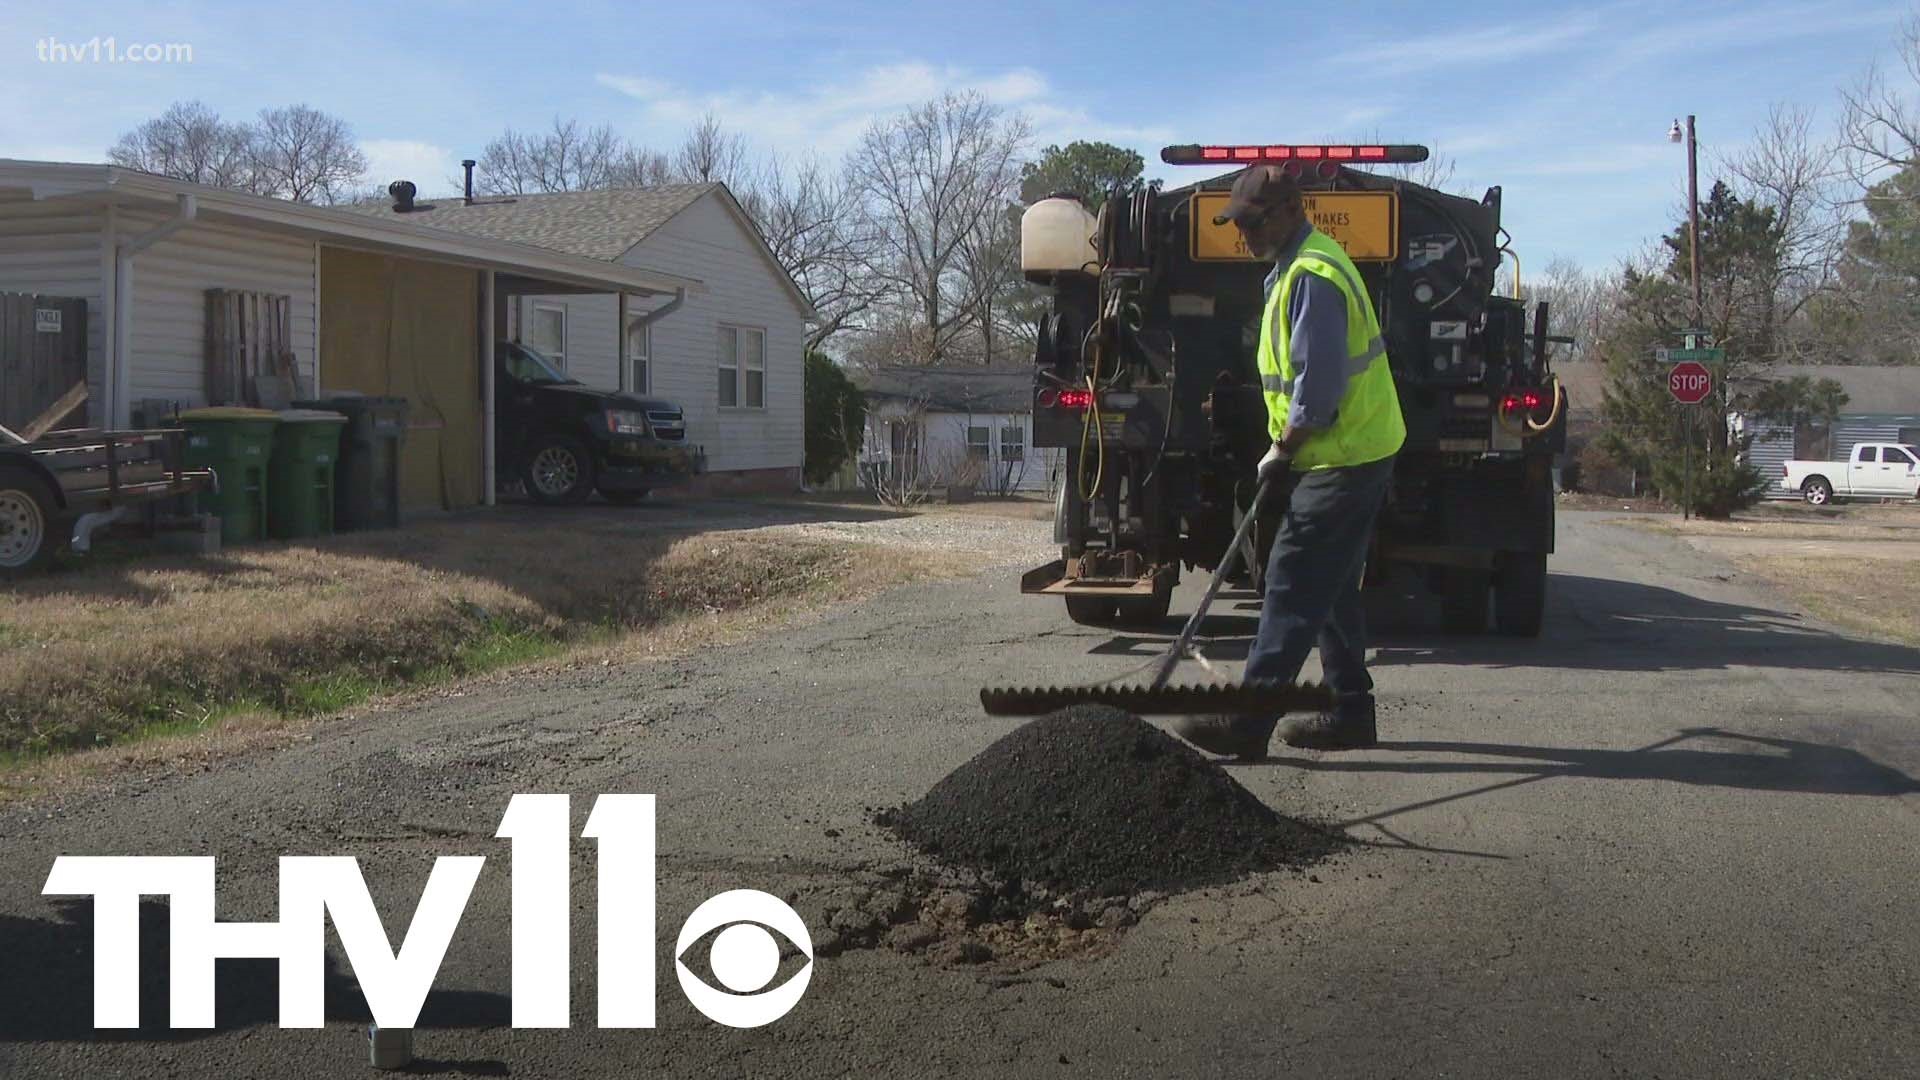 With the weather in Arkansas fluctuating from winter storms to sub-70 degree days, crews are noticing more and more potholes as a result.